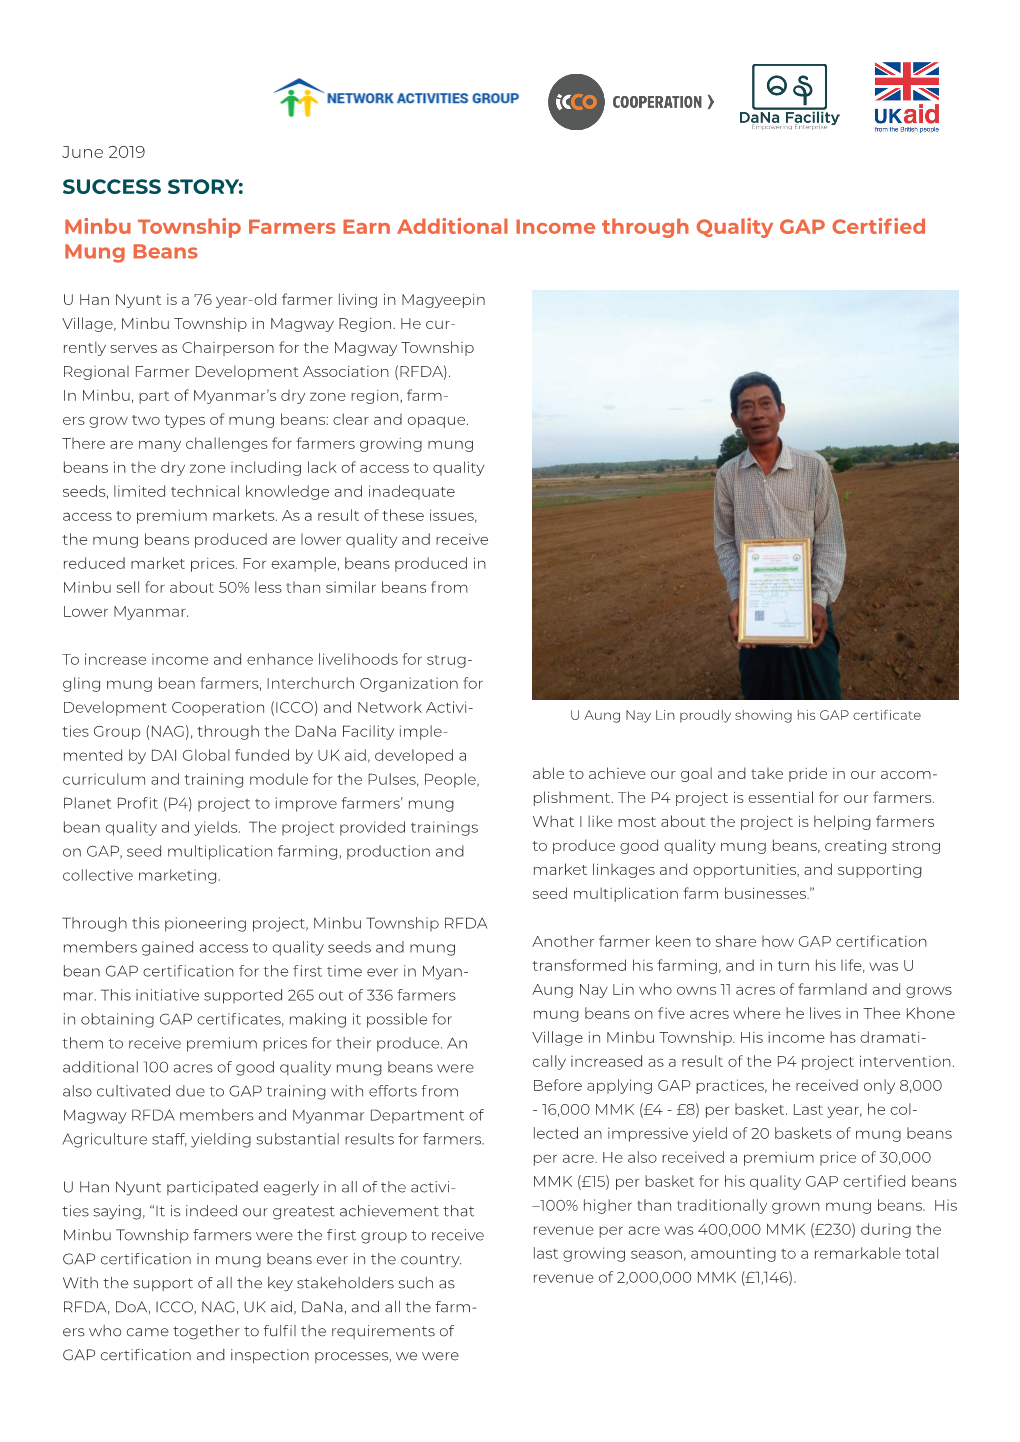 SUCCESS STORY: Minbu Township Farmers Earn Additional Income Through Quality GAP Certified Mung Beans